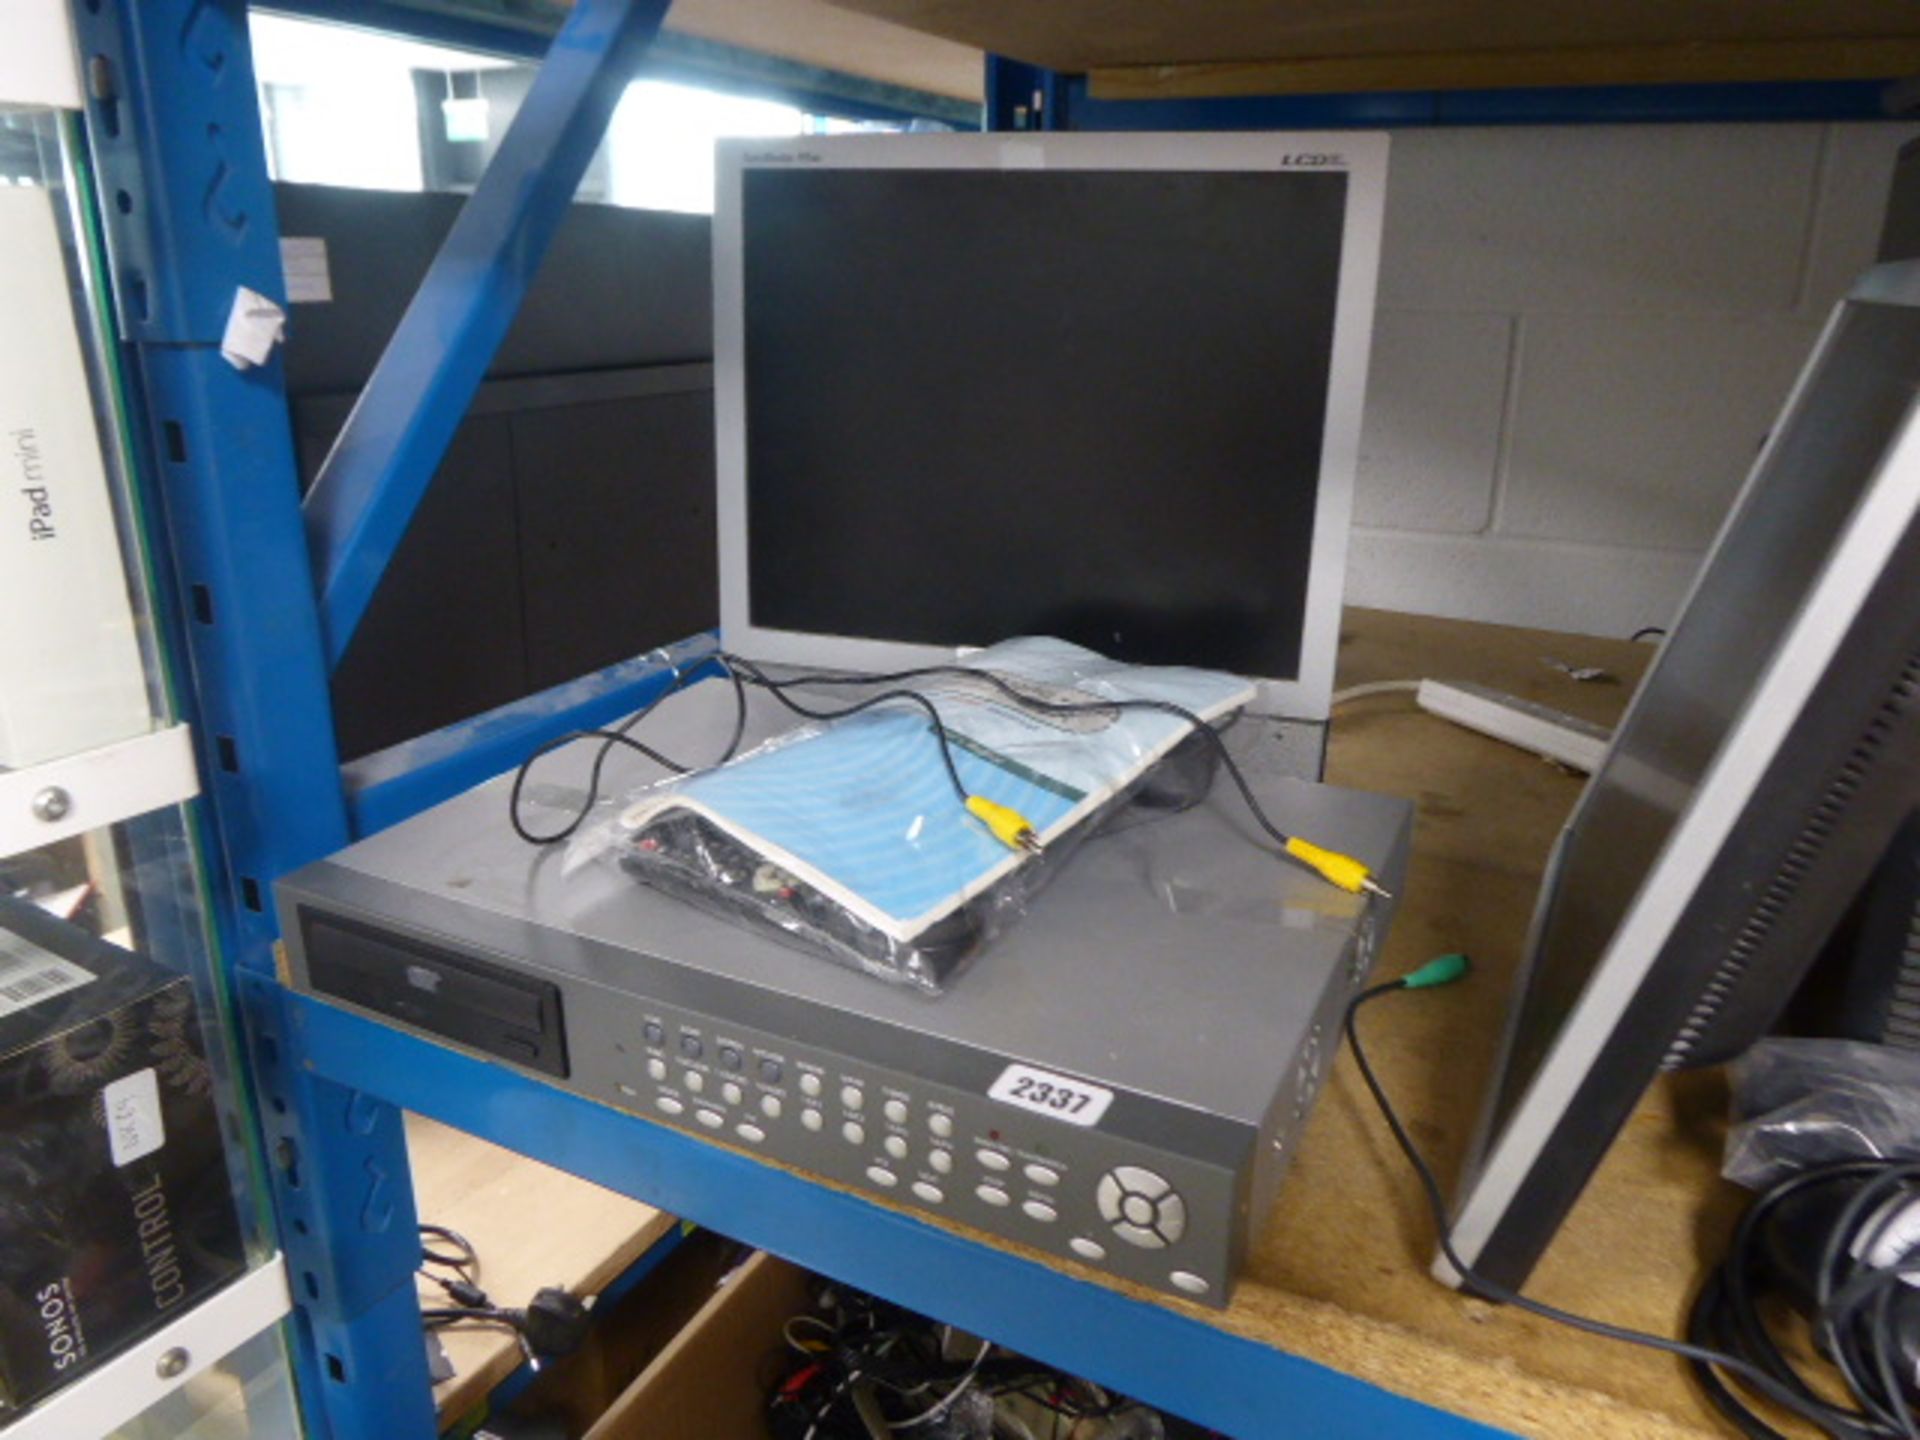 DVR recorder system with Samsung monitor and cabling